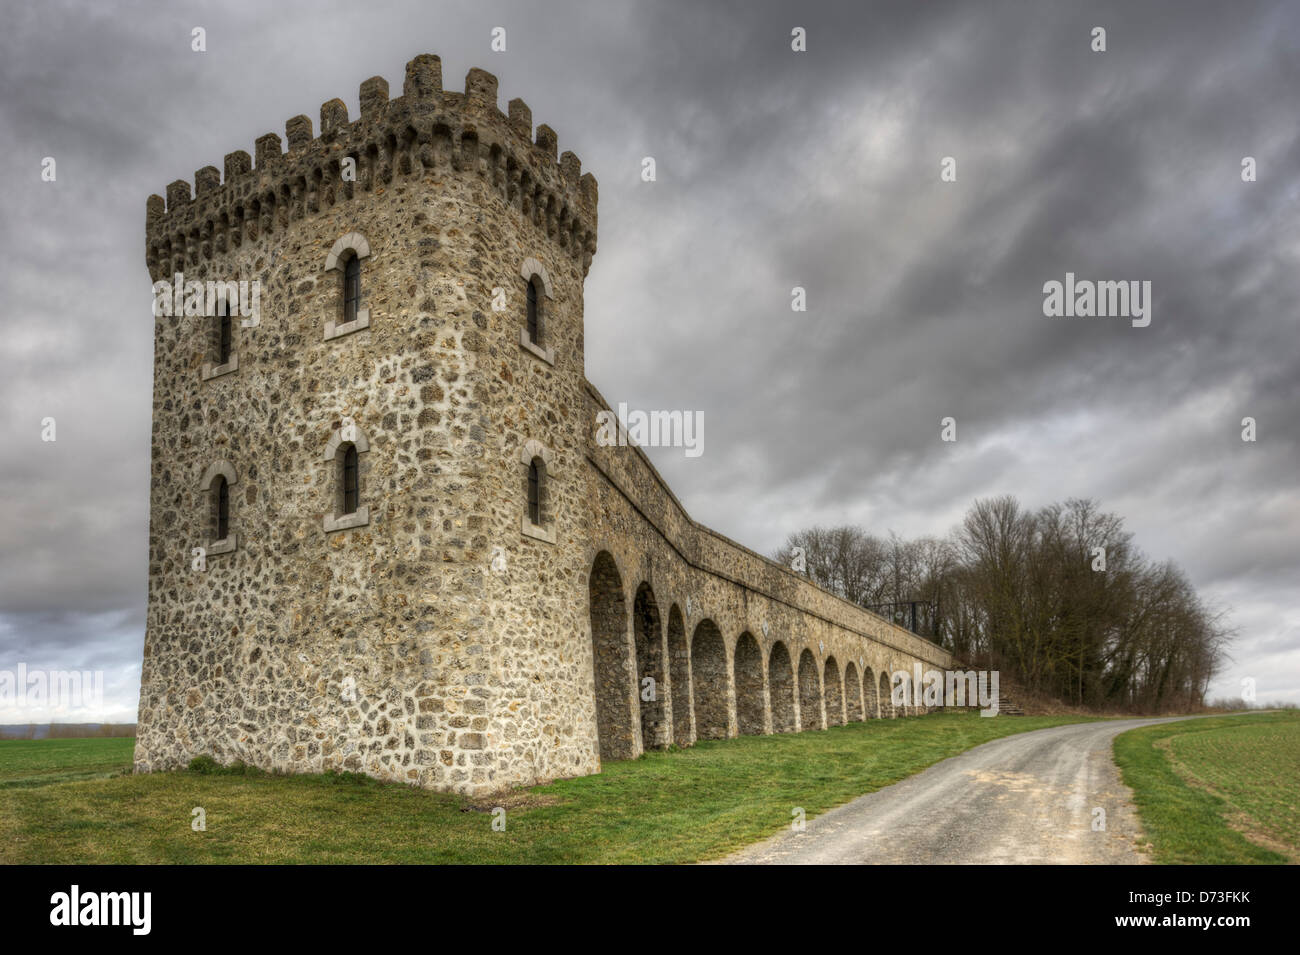 Conde-sur-Marne Tower, a listed pumping station built in the 19th century, Marne, Champagne Ardennes, France Stock Photo